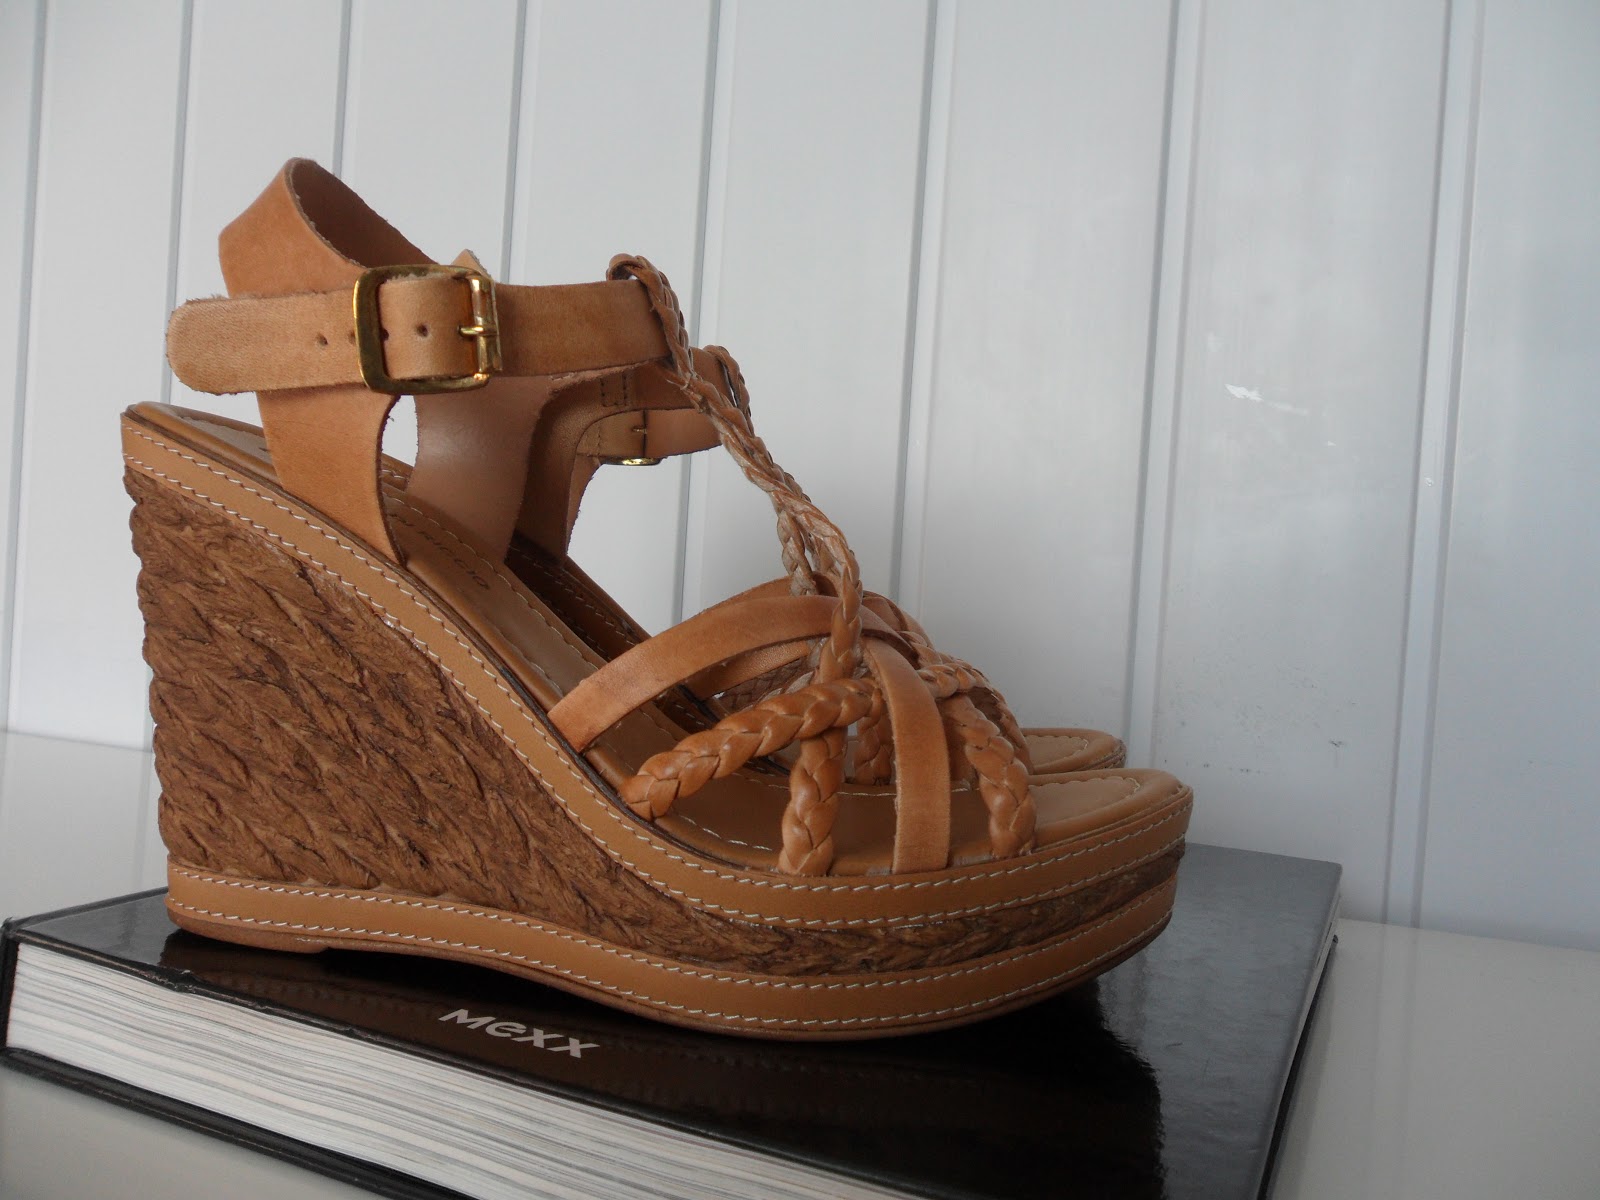 runway chick: My new wedges